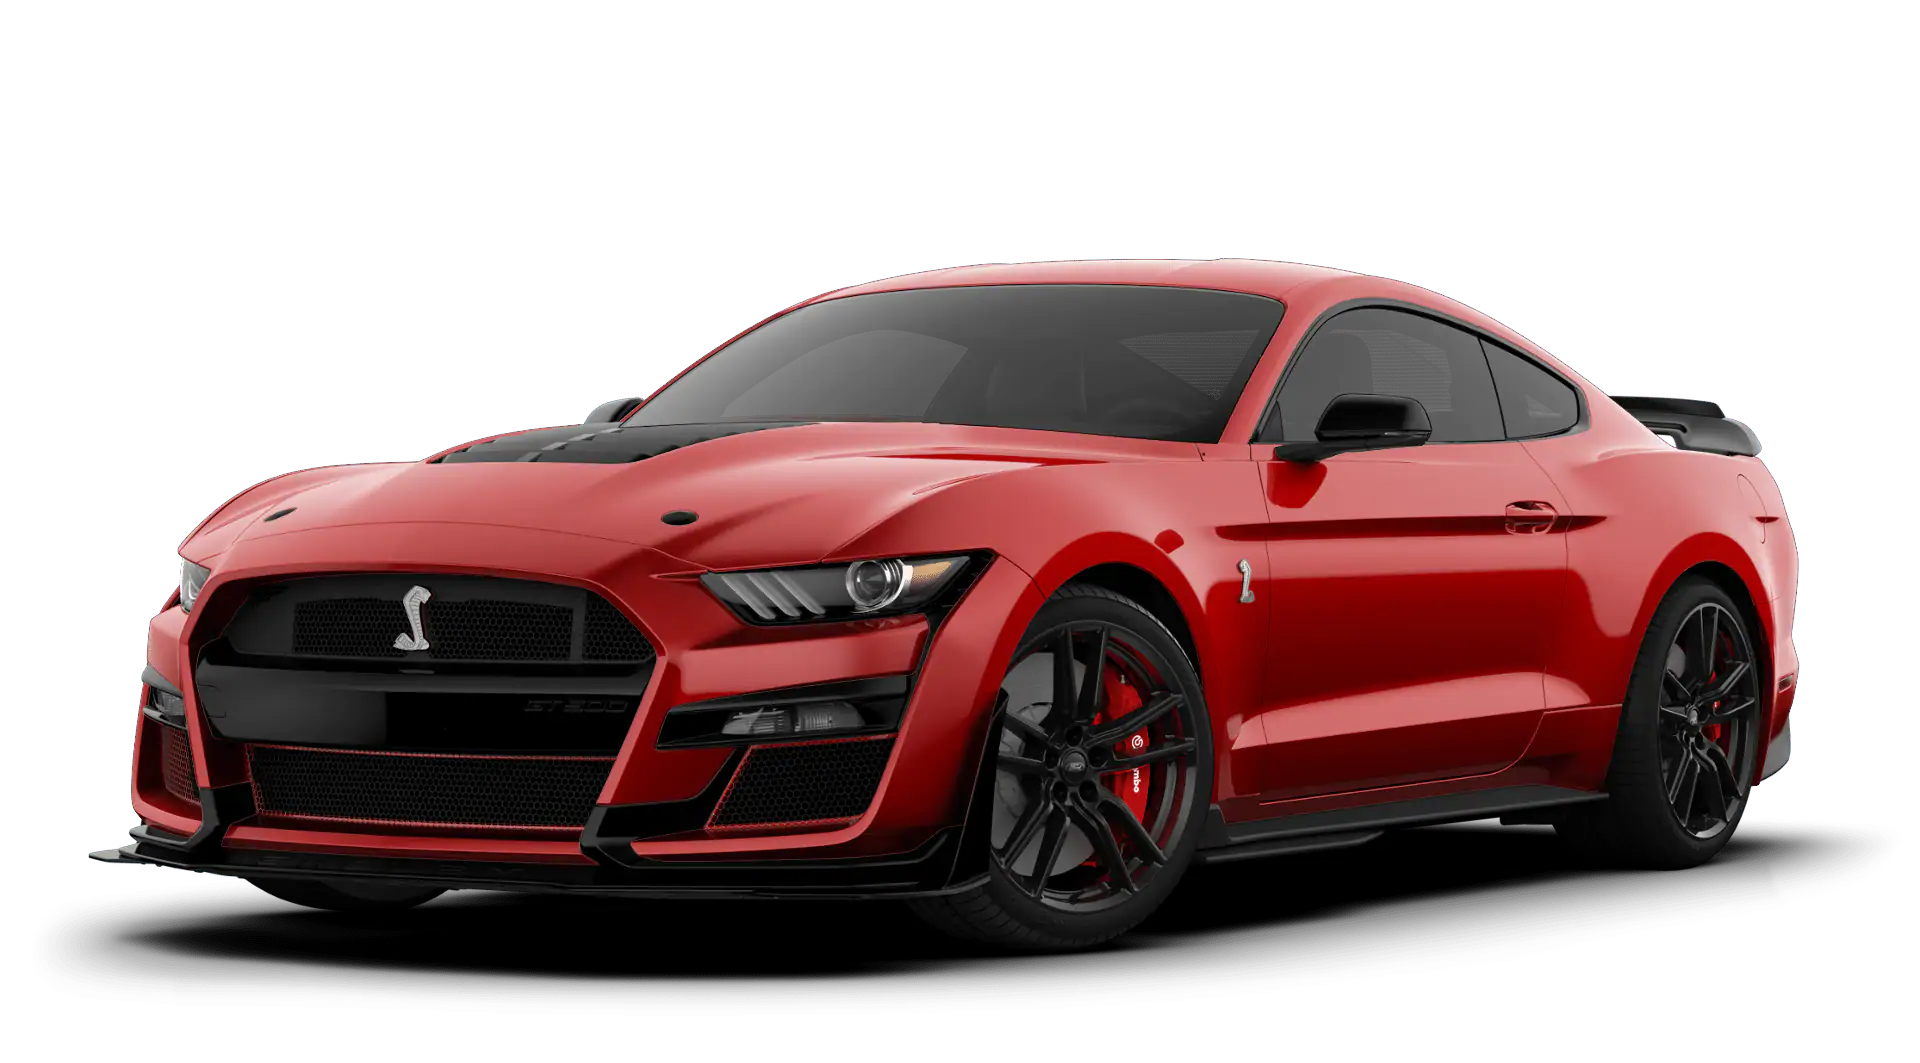 2020 Ford Mustang Shelby Gt500 Exterior Color Options Akins Ford